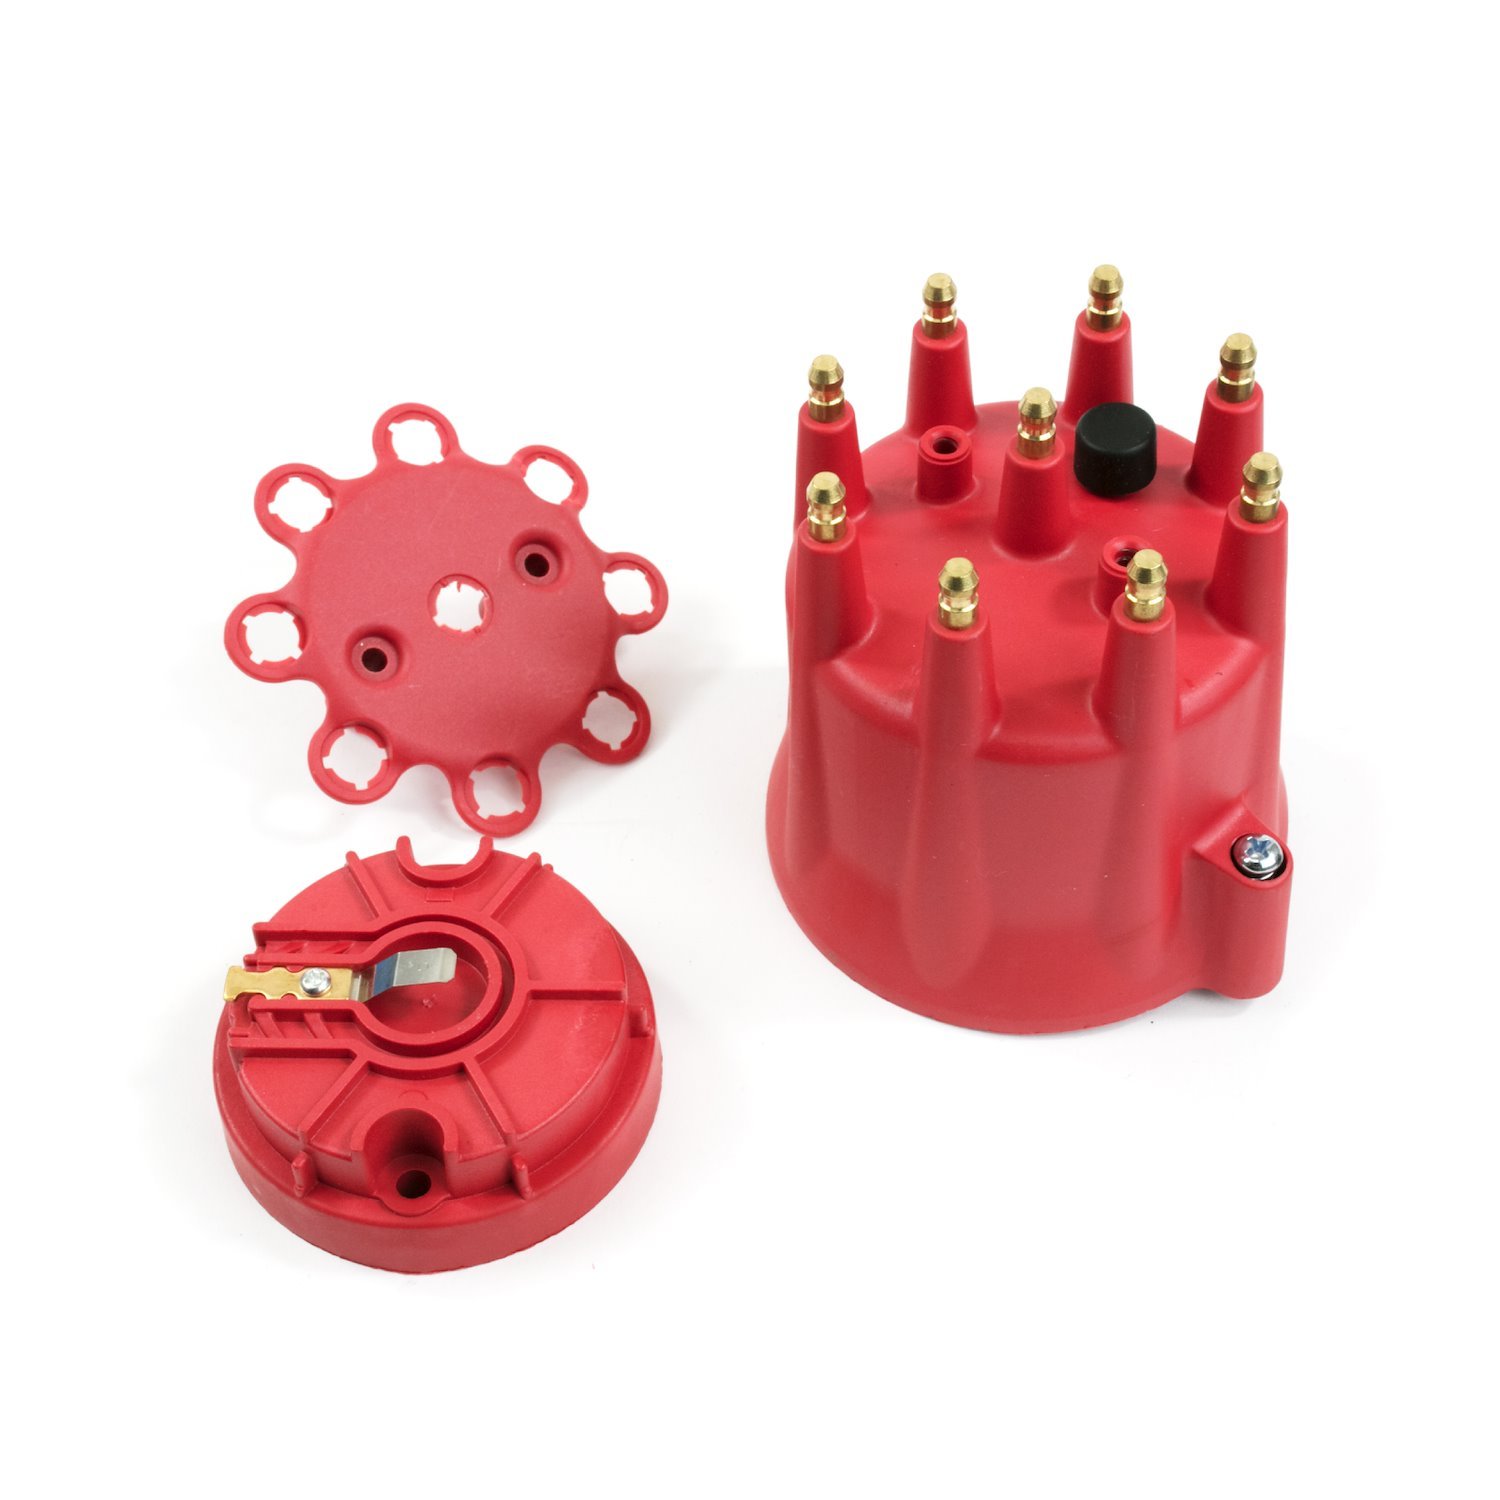 JM6973R Pro Series Distributor Cap and Rotor Kit, 8 Cylinder Male, Red